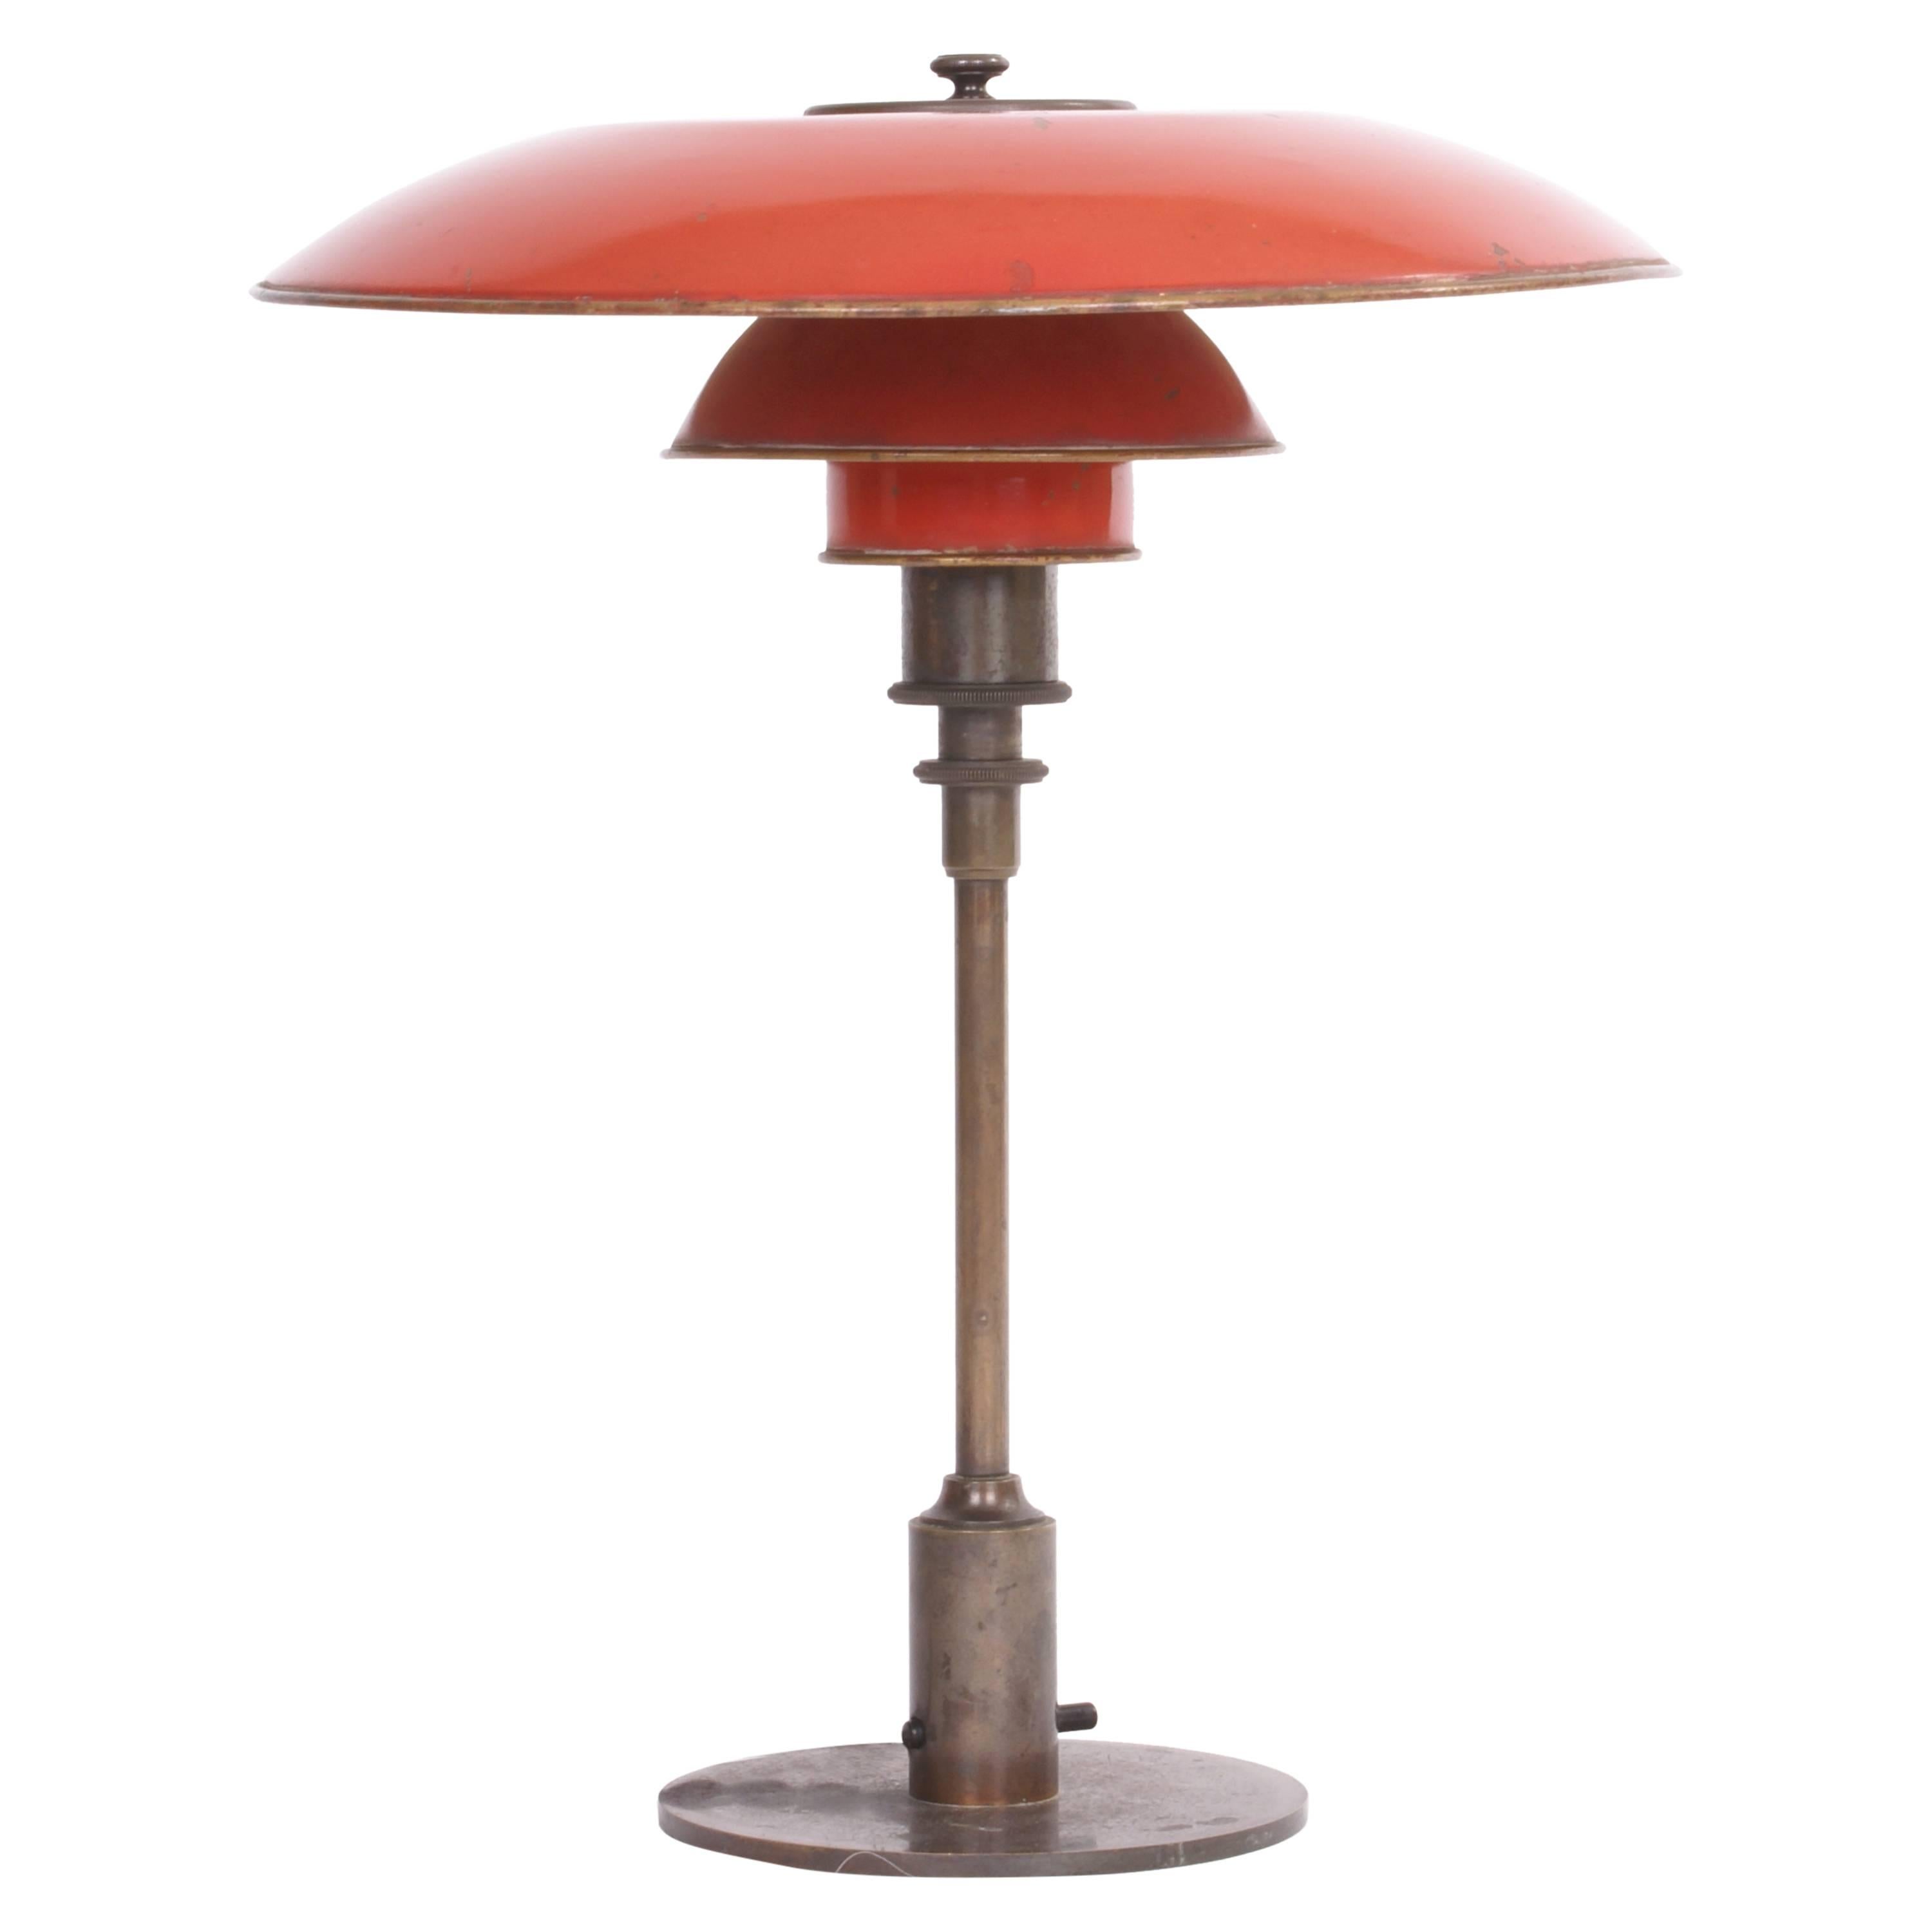 Poul Henningsen PH 3.5/2 Desk Lamp with Red Copper shades - dated 1926-28 For Sale